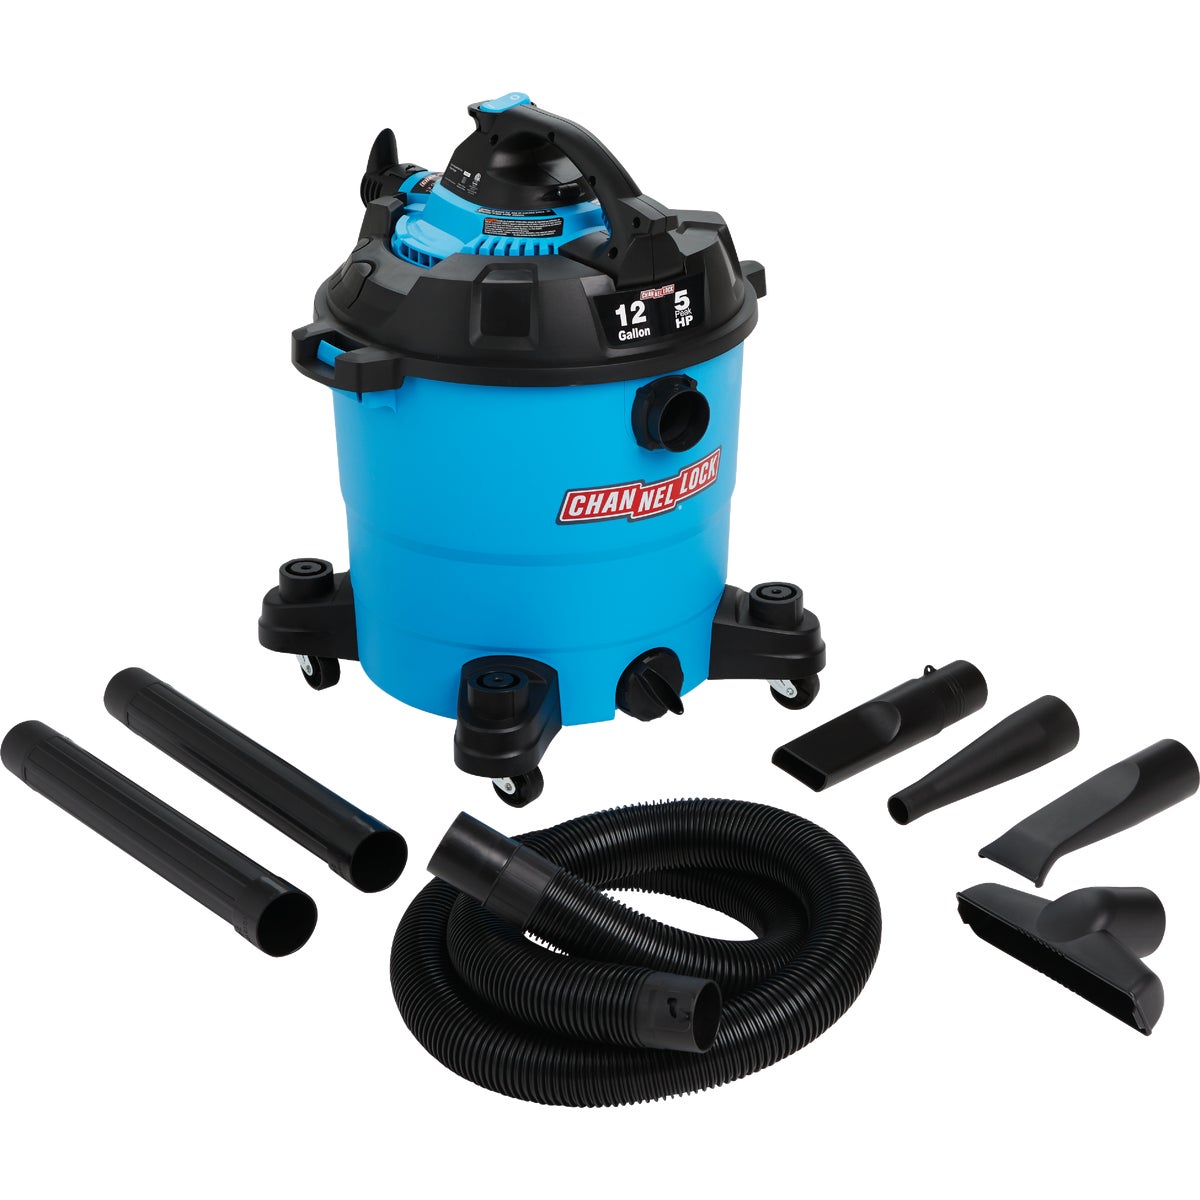 Item 352512, Tackle the toughest cleanup jobs with ease using the Channellock 12 Gallon 